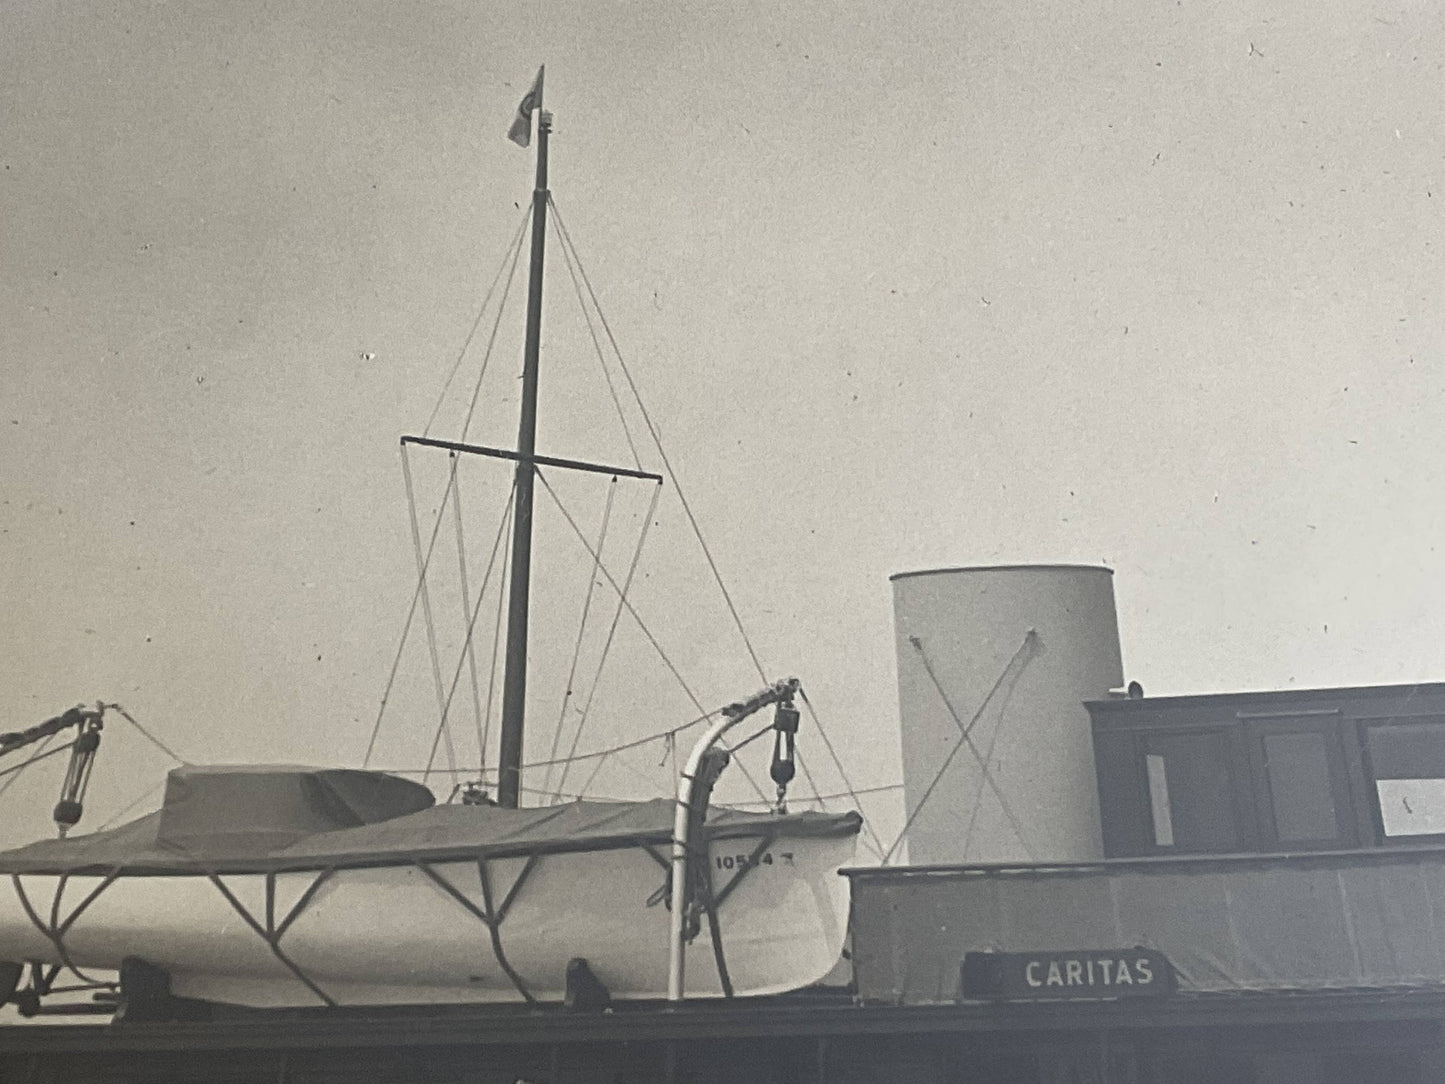 Photograph Of The Lawley Yacht Caritas